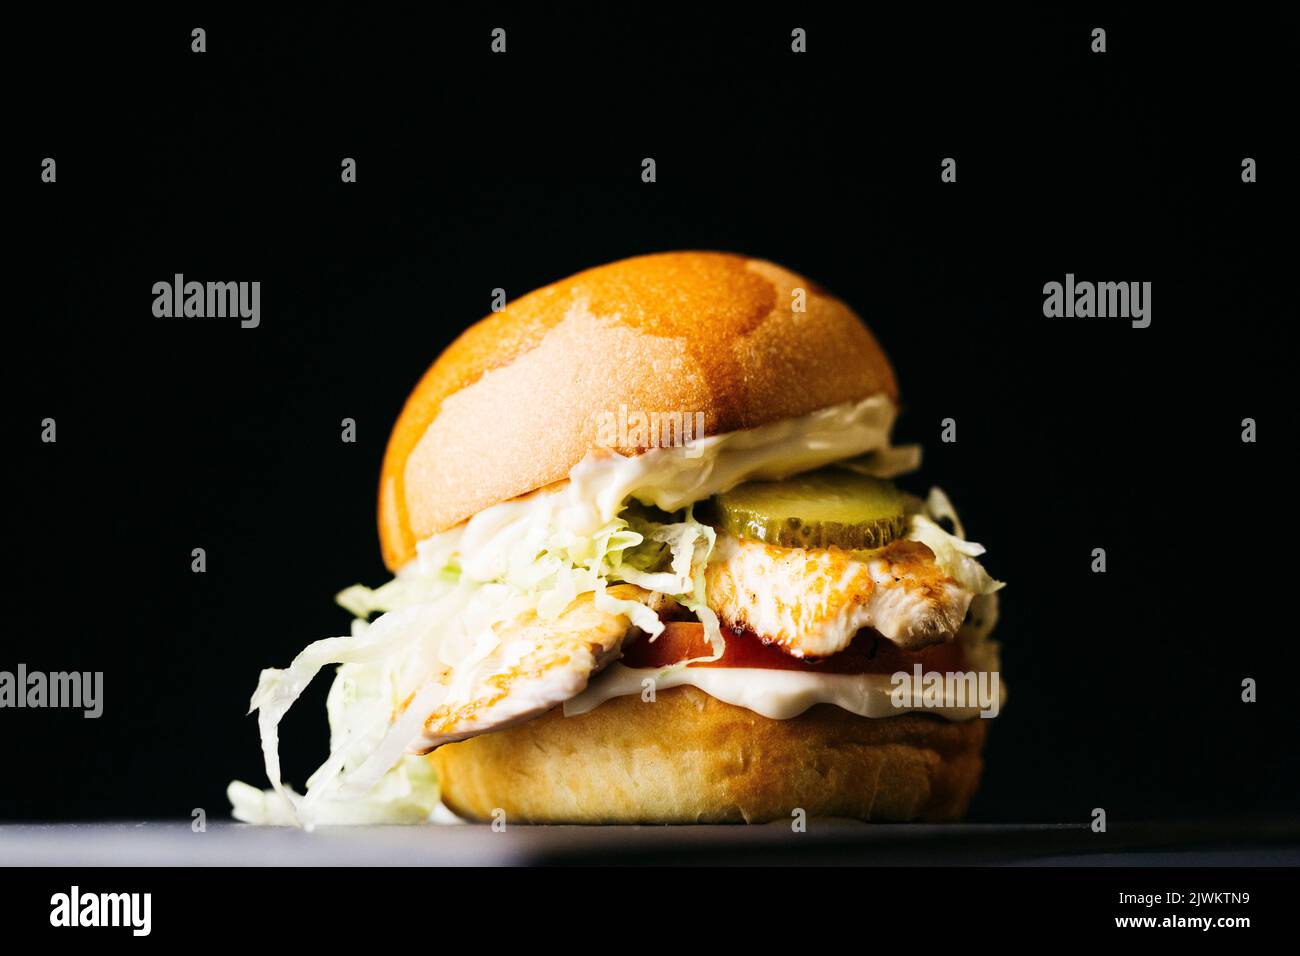 Chicken burger with vegetables over a black background Stock Photo